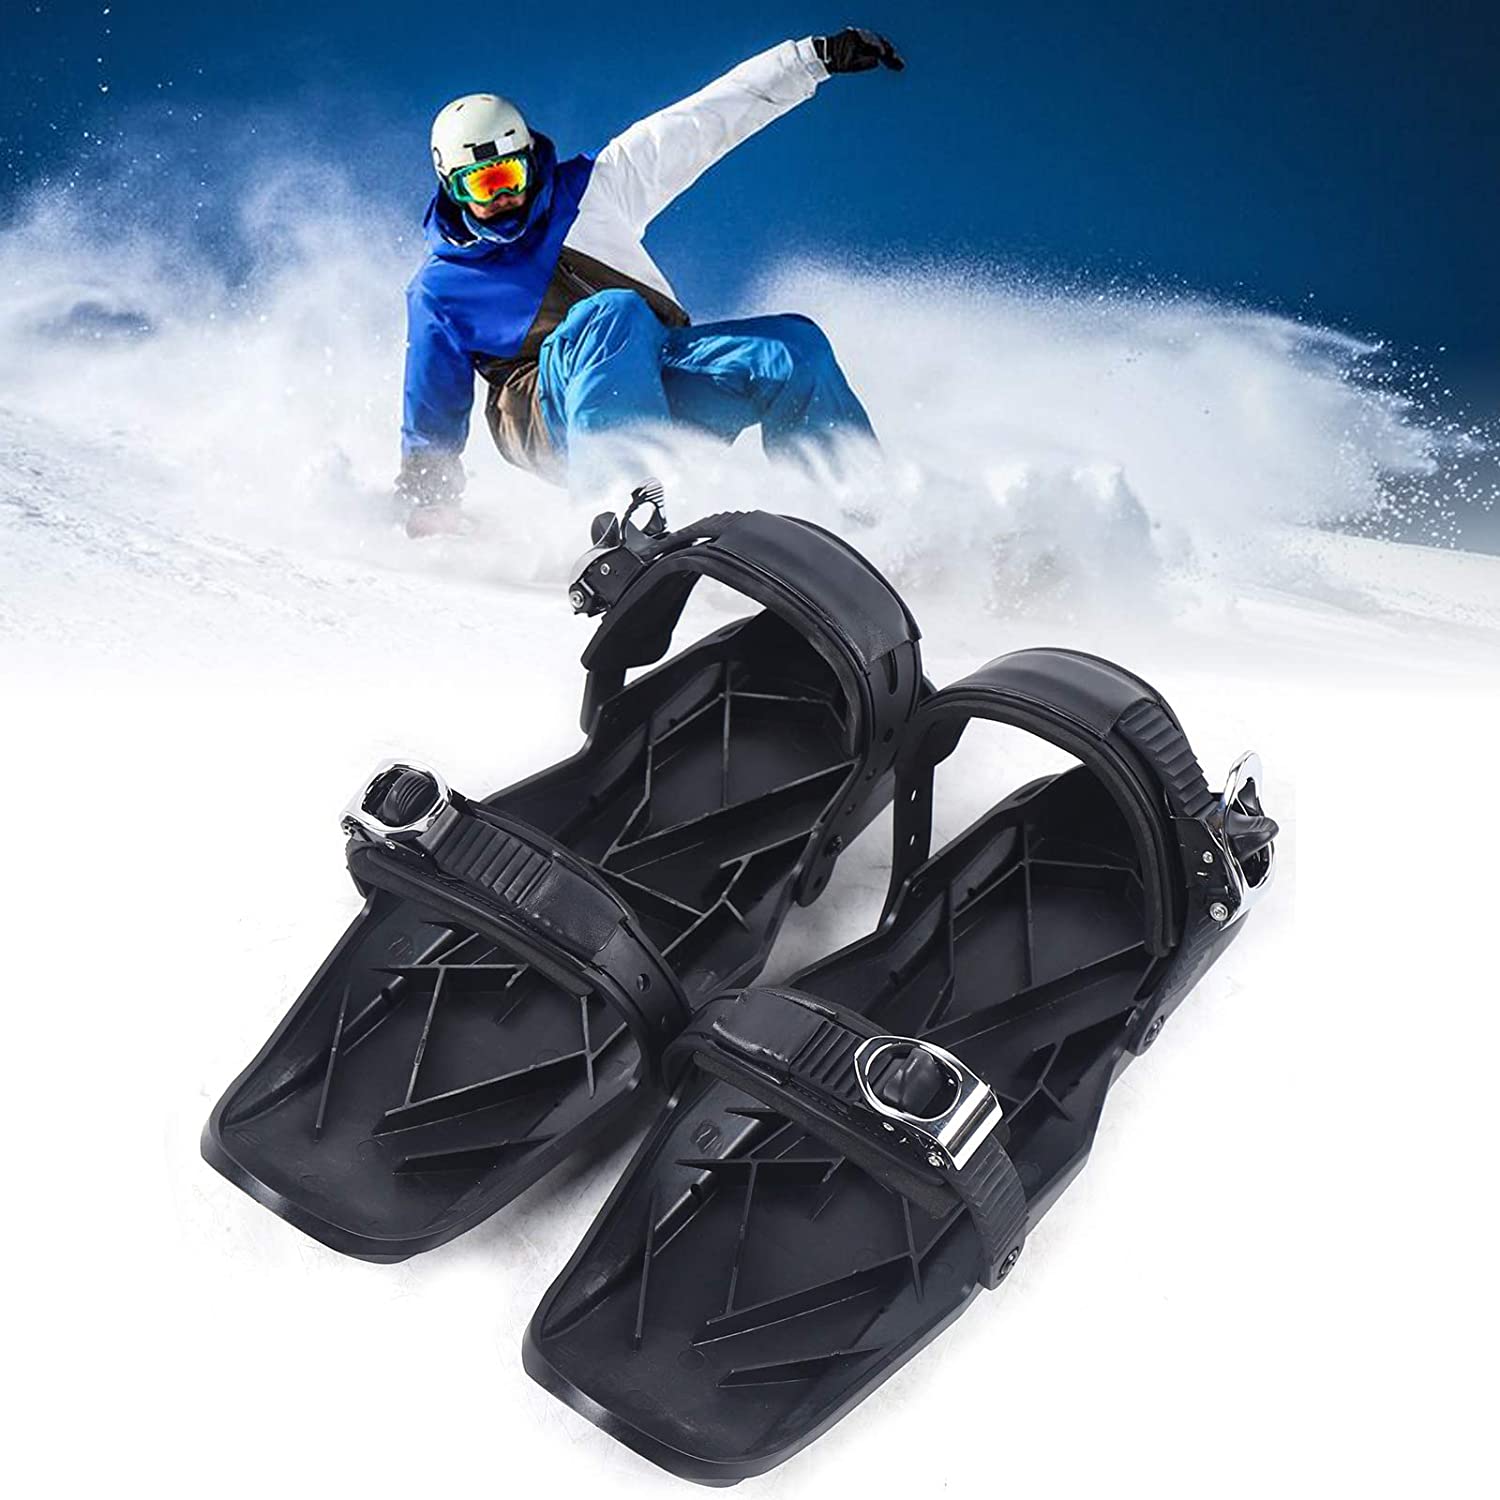 CNCEST Outdoor Portable Snowboard Light Weight Mini Sled Snow Board Ski Boots Ski Shoes Combine Skates with Skis for Women/Men Adults - image 5 of 5